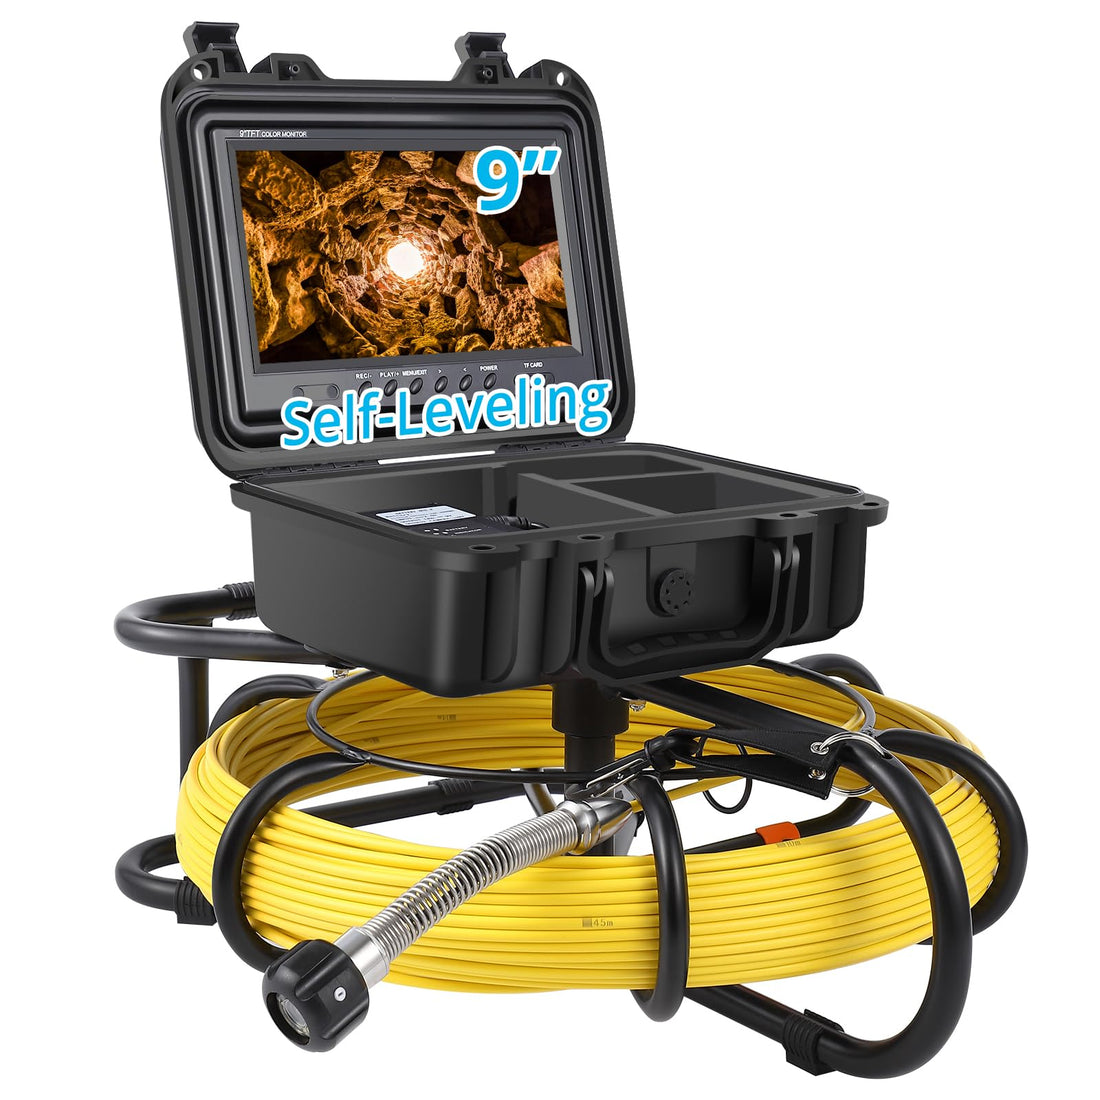 165ft Snake Camera Sewer Camera 9 Inch HD LCD DVR and Adjustable LEDs for Sewer and Drainage Pipe